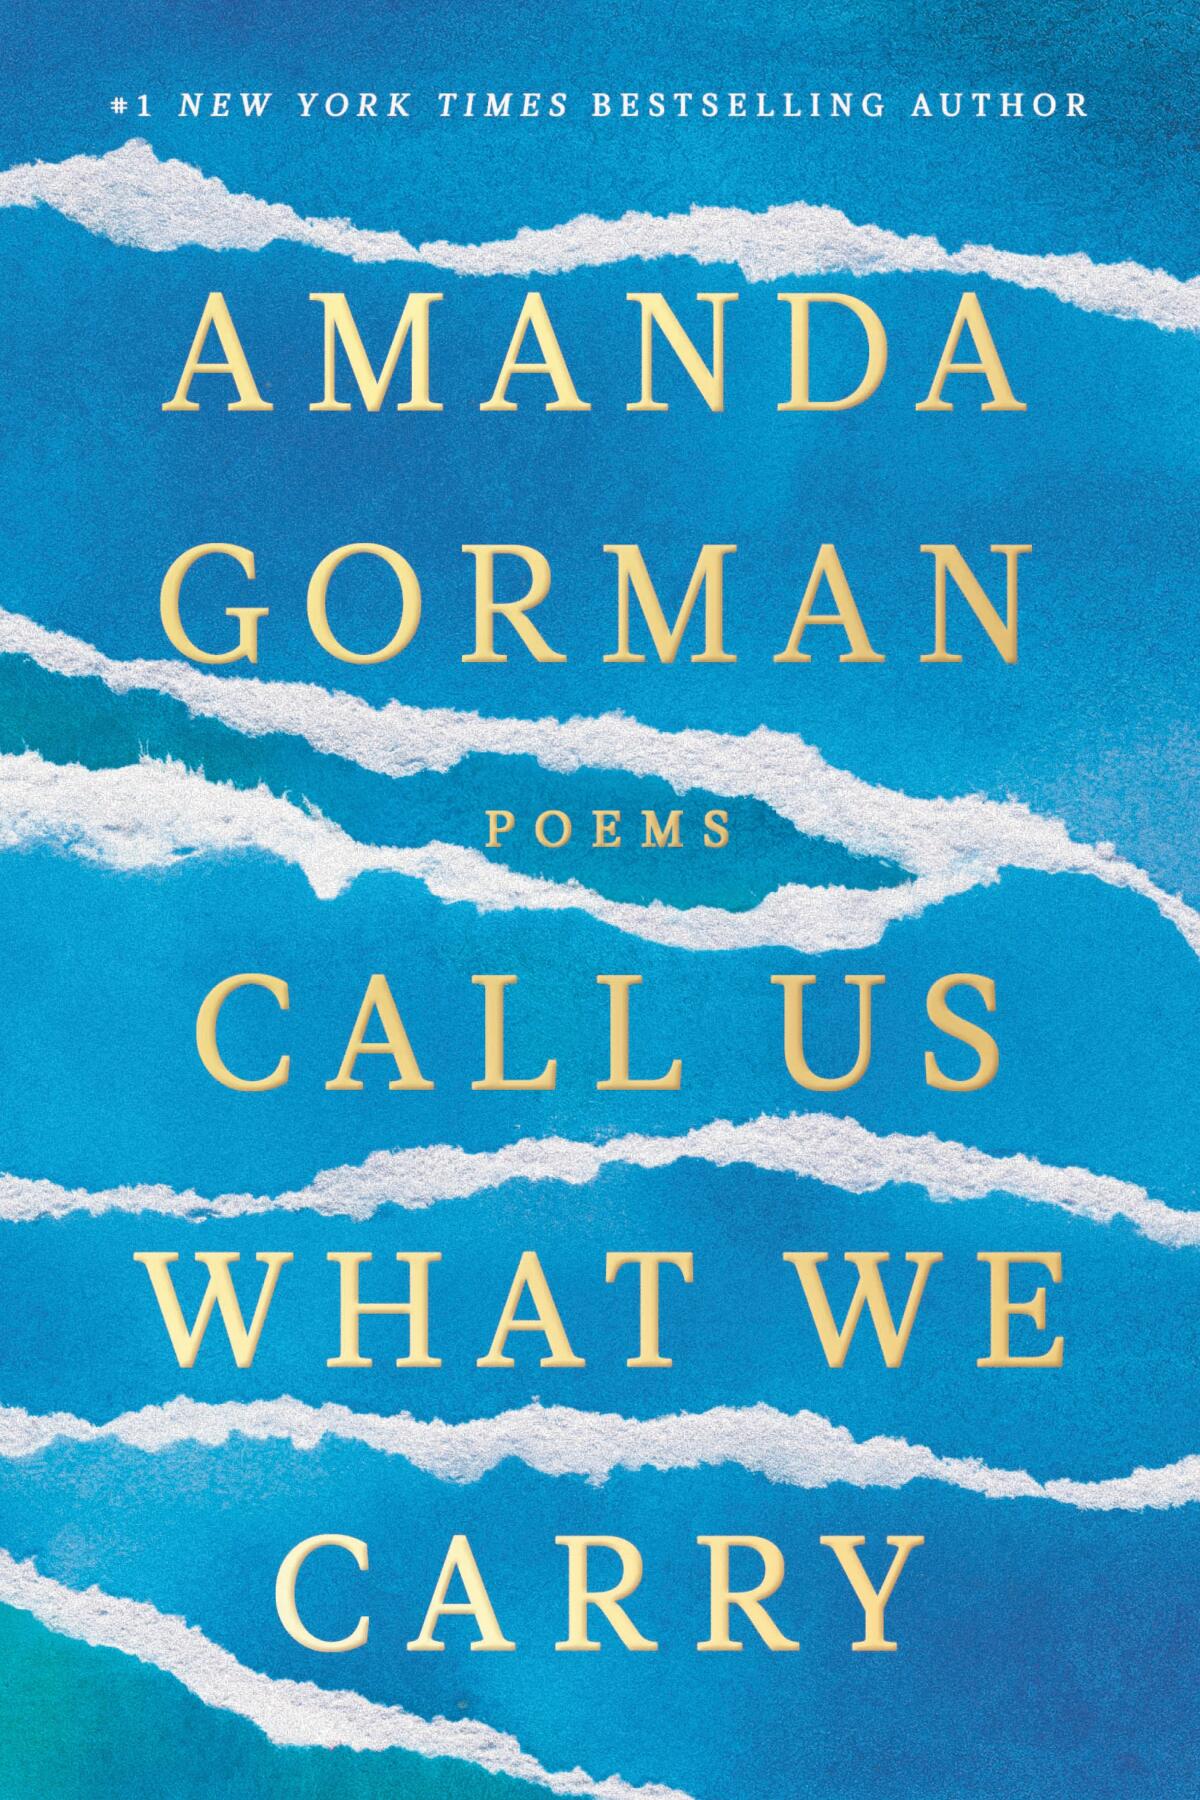 The cover of Amanda Gorman's most recent poetry collection, "Call Us What We Carry."